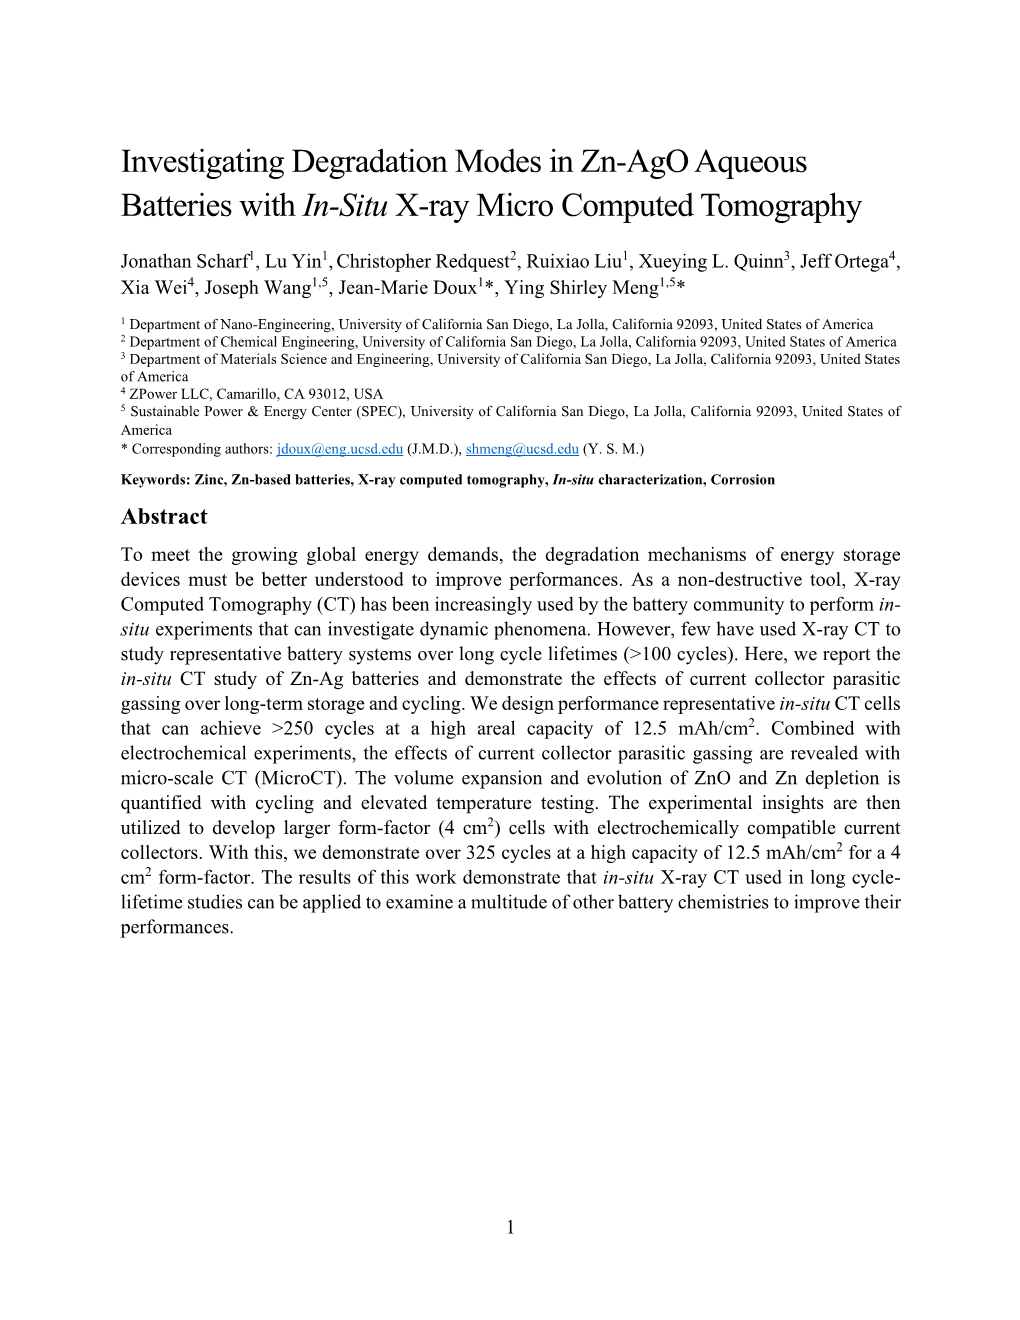 Investigating Degradation Modes in Zn-Ago Aqueous Batteries with In-Situ X-Ray Micro Computed Tomography